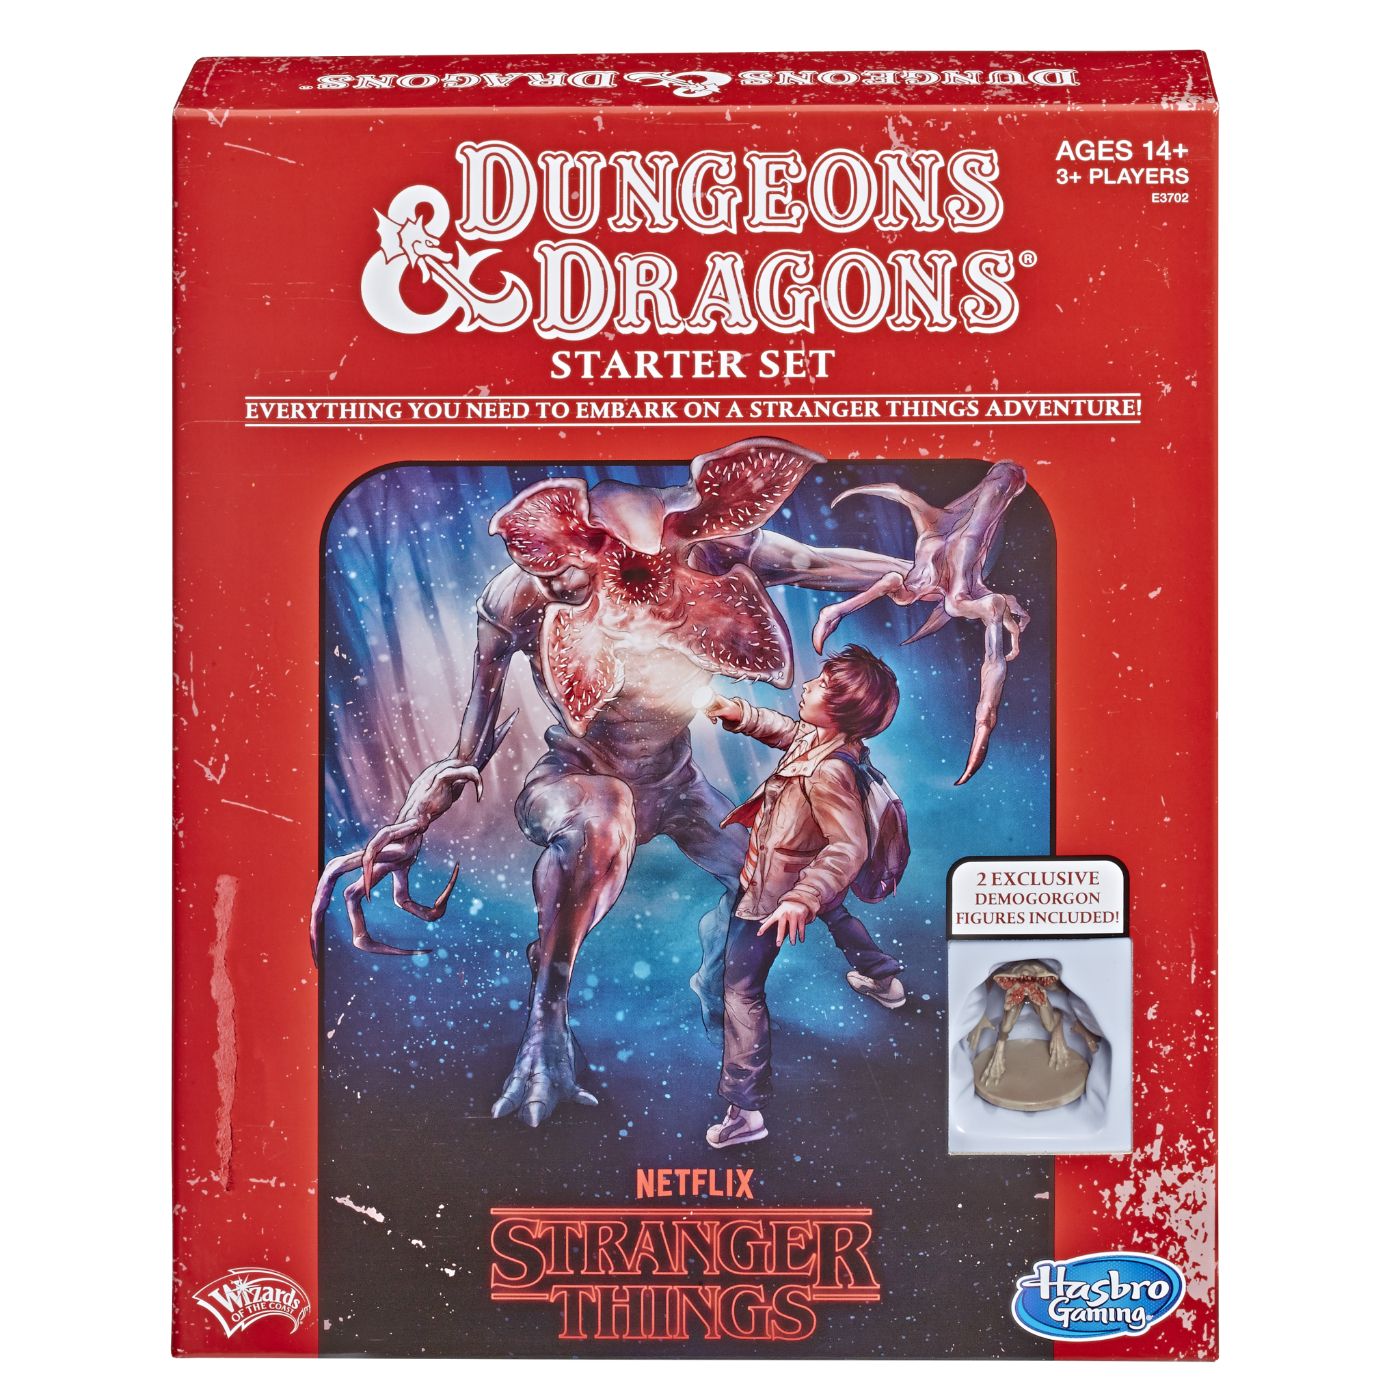 Stranger Things Coming to Dungeons & Dragons This Spring